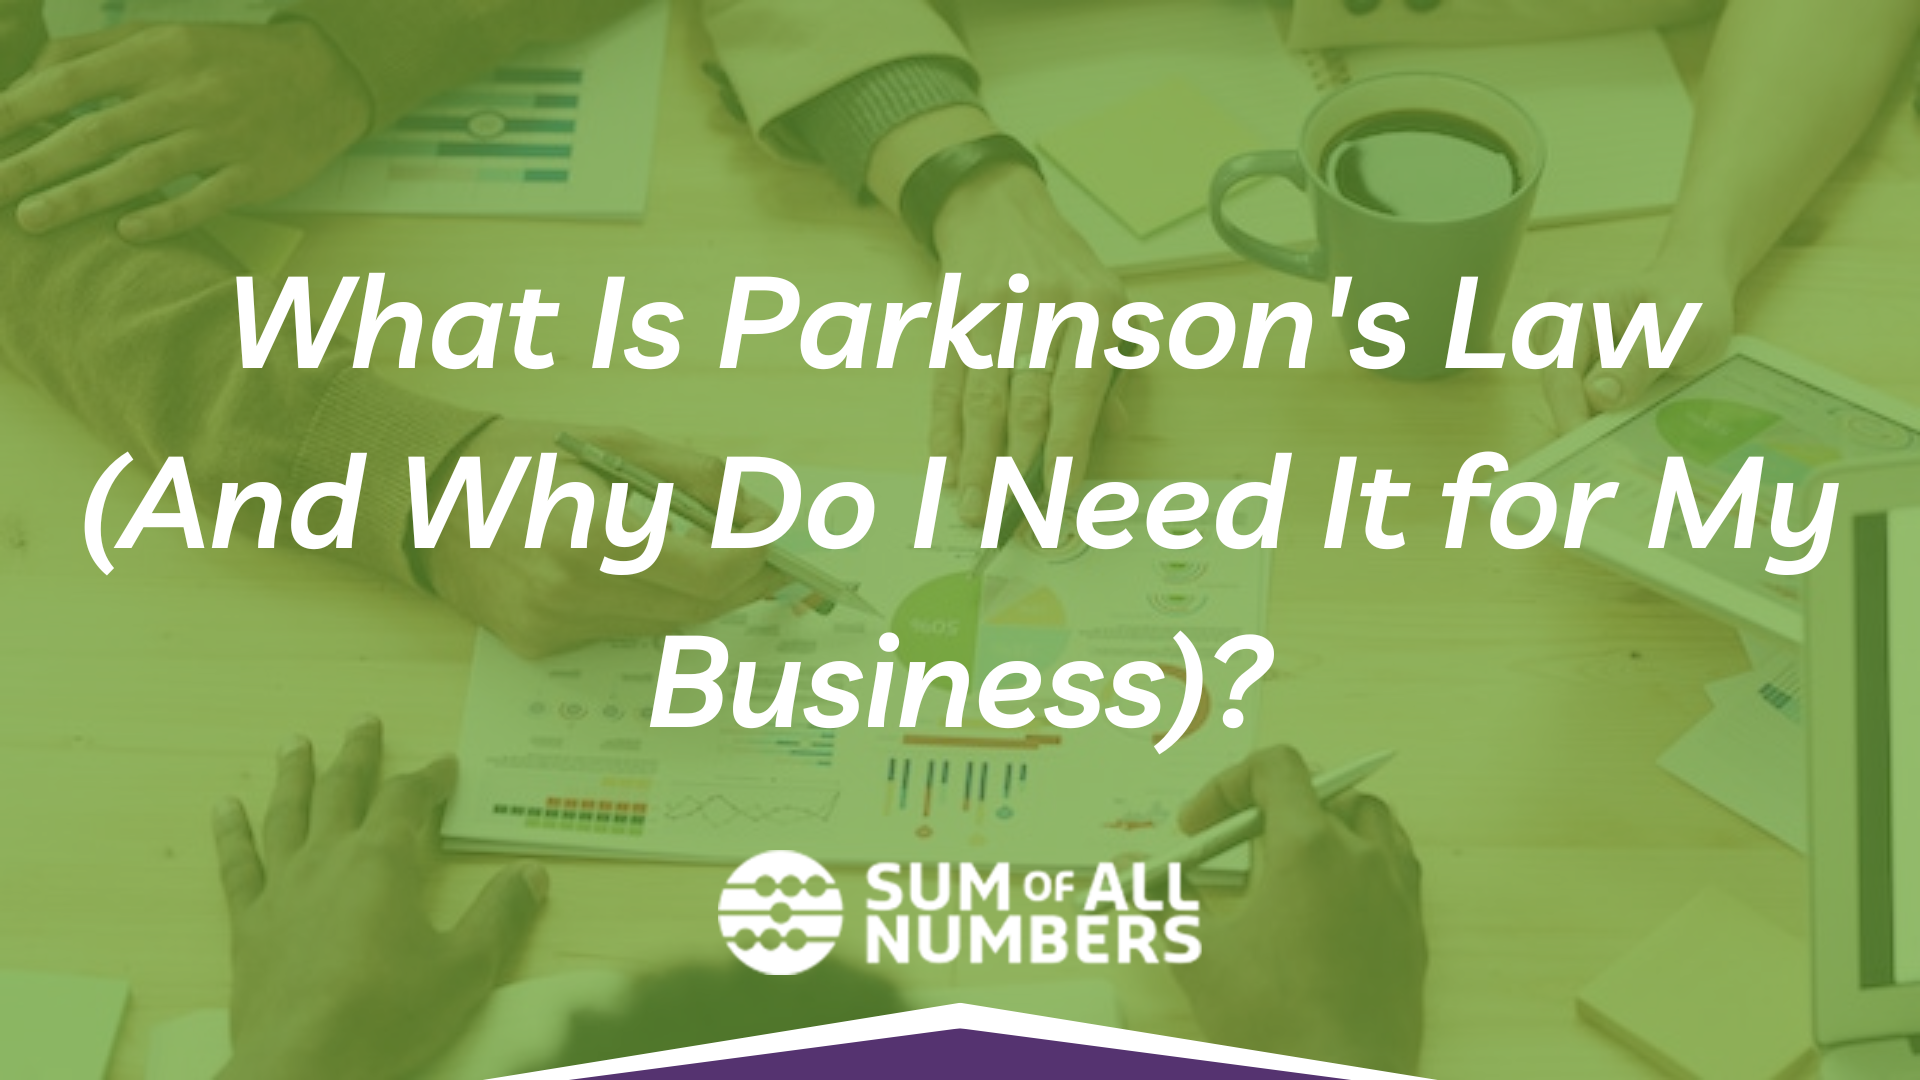 What Is Parkinson's Law (And Why Do I Need It for My Business)?